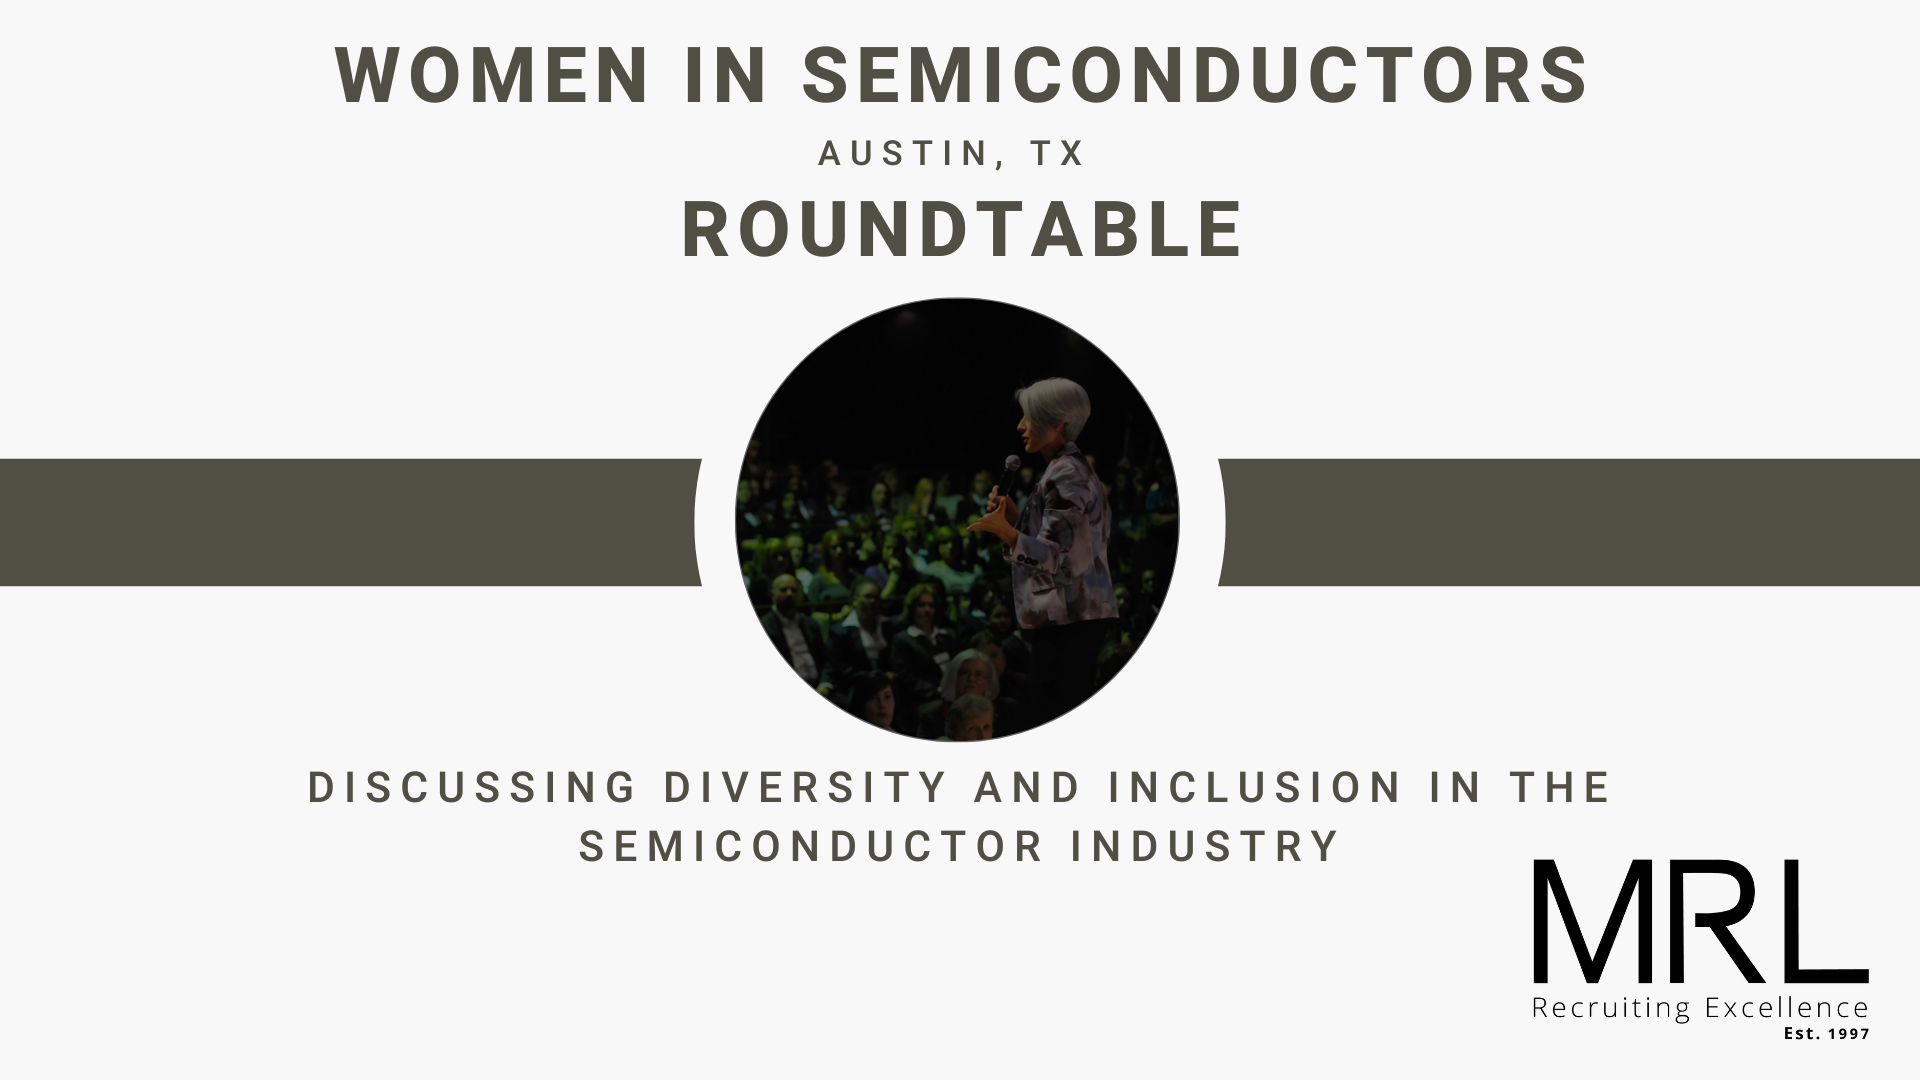 Women in Semiconductors in the spotlight - An interview with MRL Consulting Group